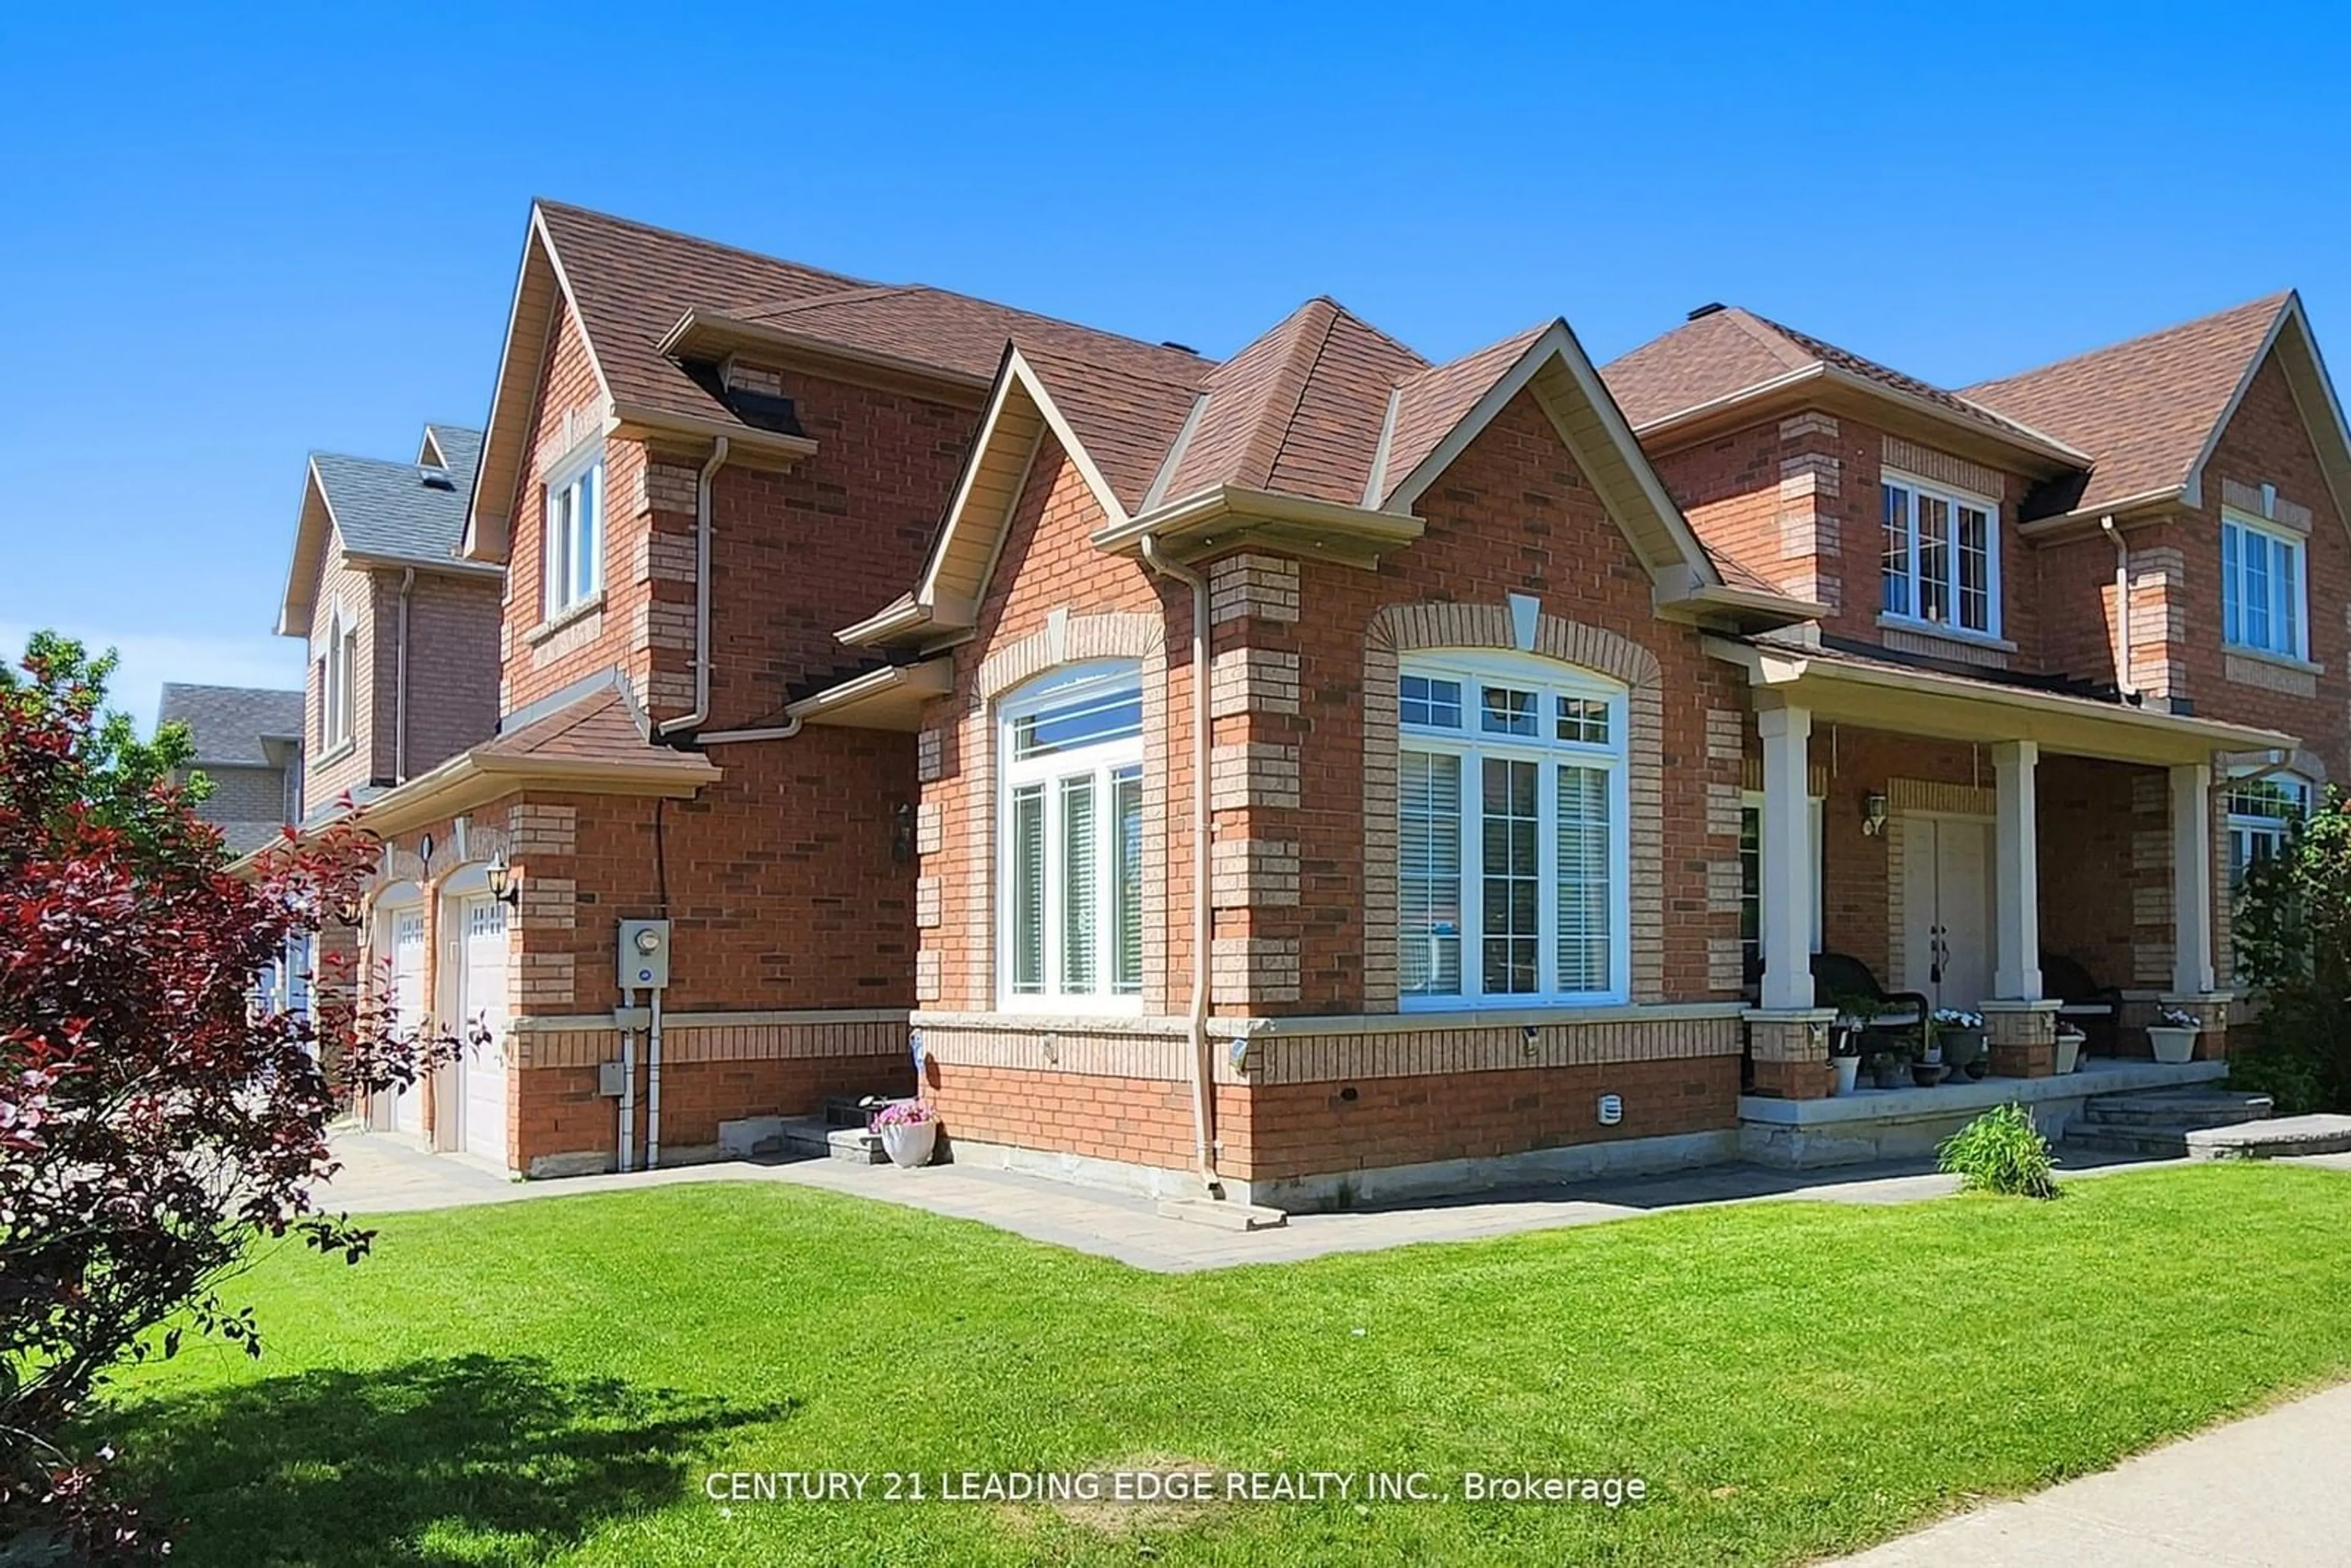 Home with brick exterior material for 114 Legacy Dr, Markham Ontario L3S 4B5